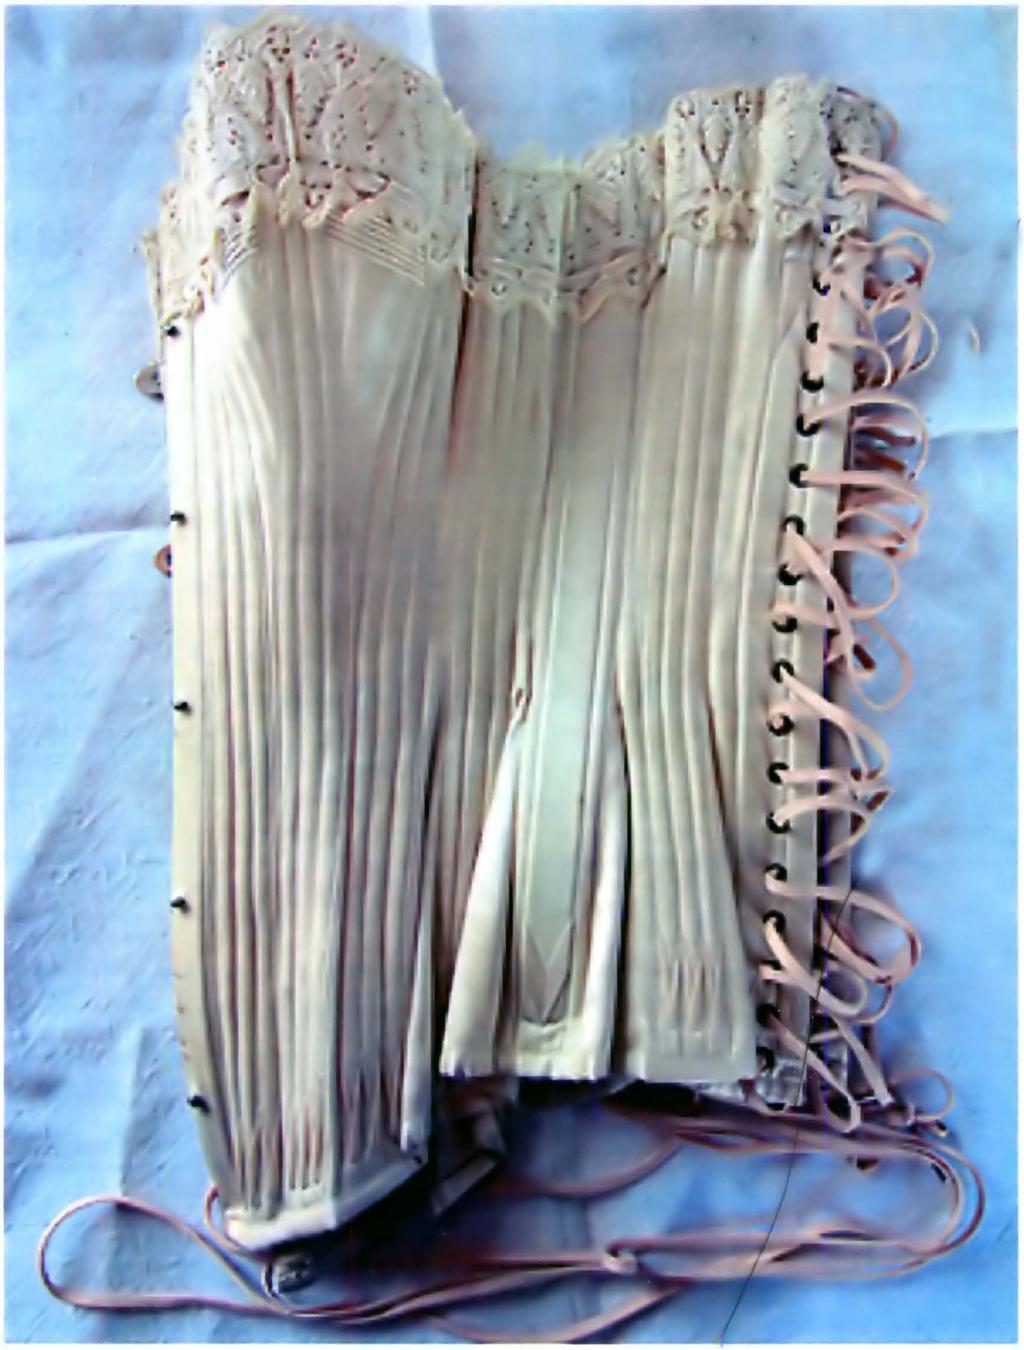 pliable than any metal boning, flat or spiral, that I had seen. I had finally found a corset1'>oned with real whalebone! I had always known about whalebone but I had never seen it.